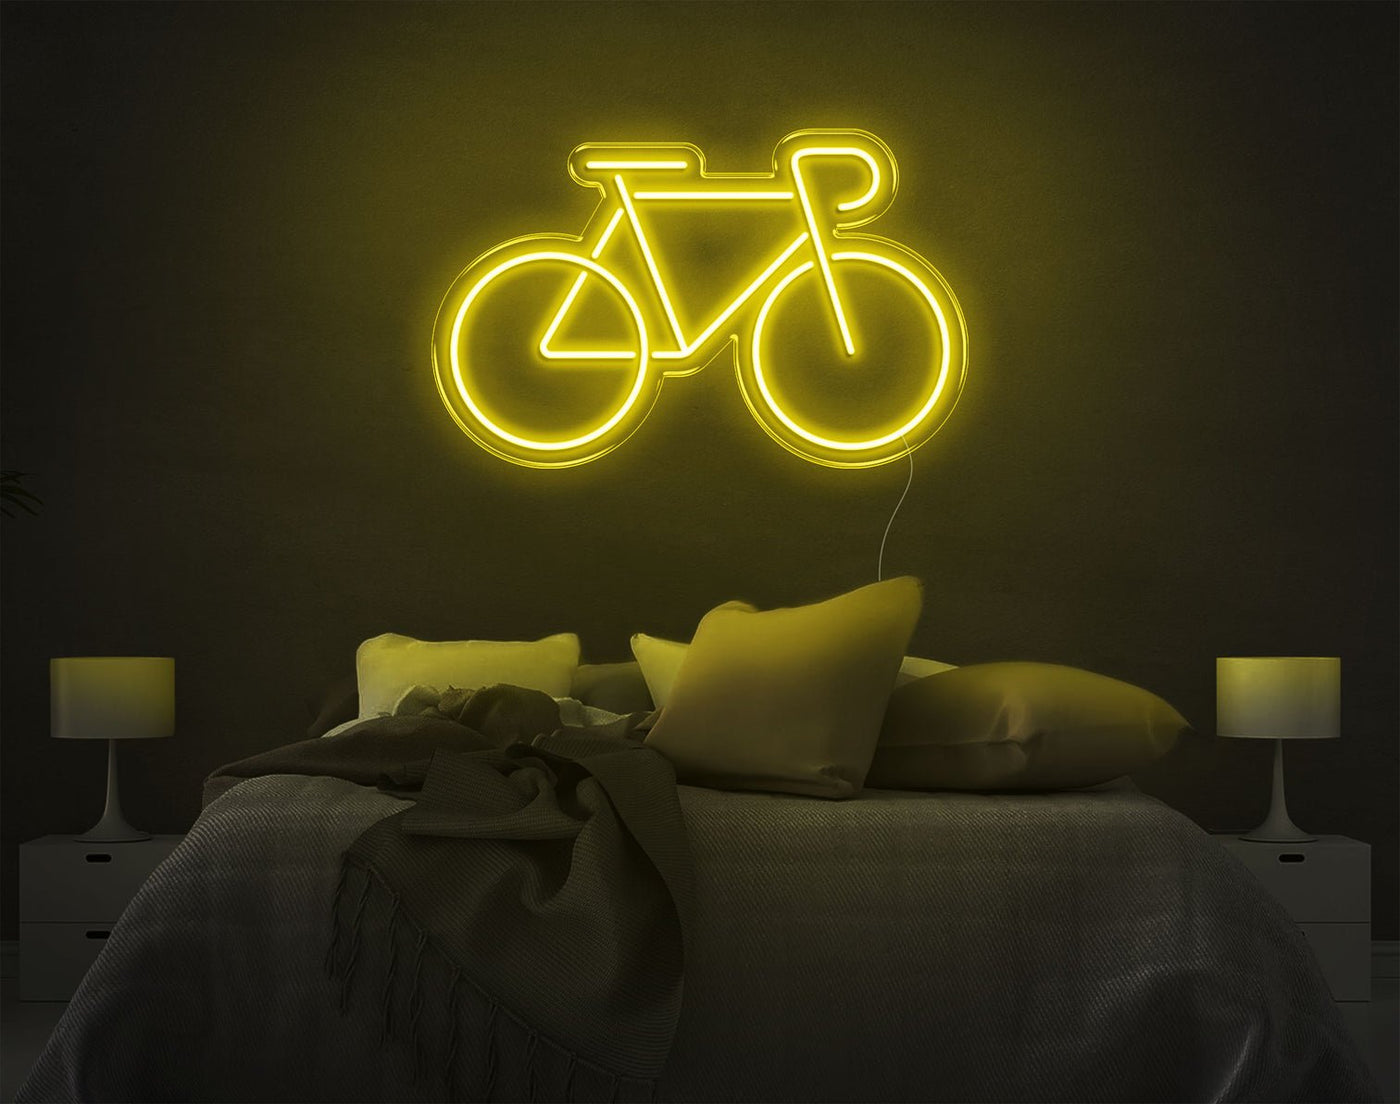 Bicycle LED Neon Sign - 15inch x 24inchYellow